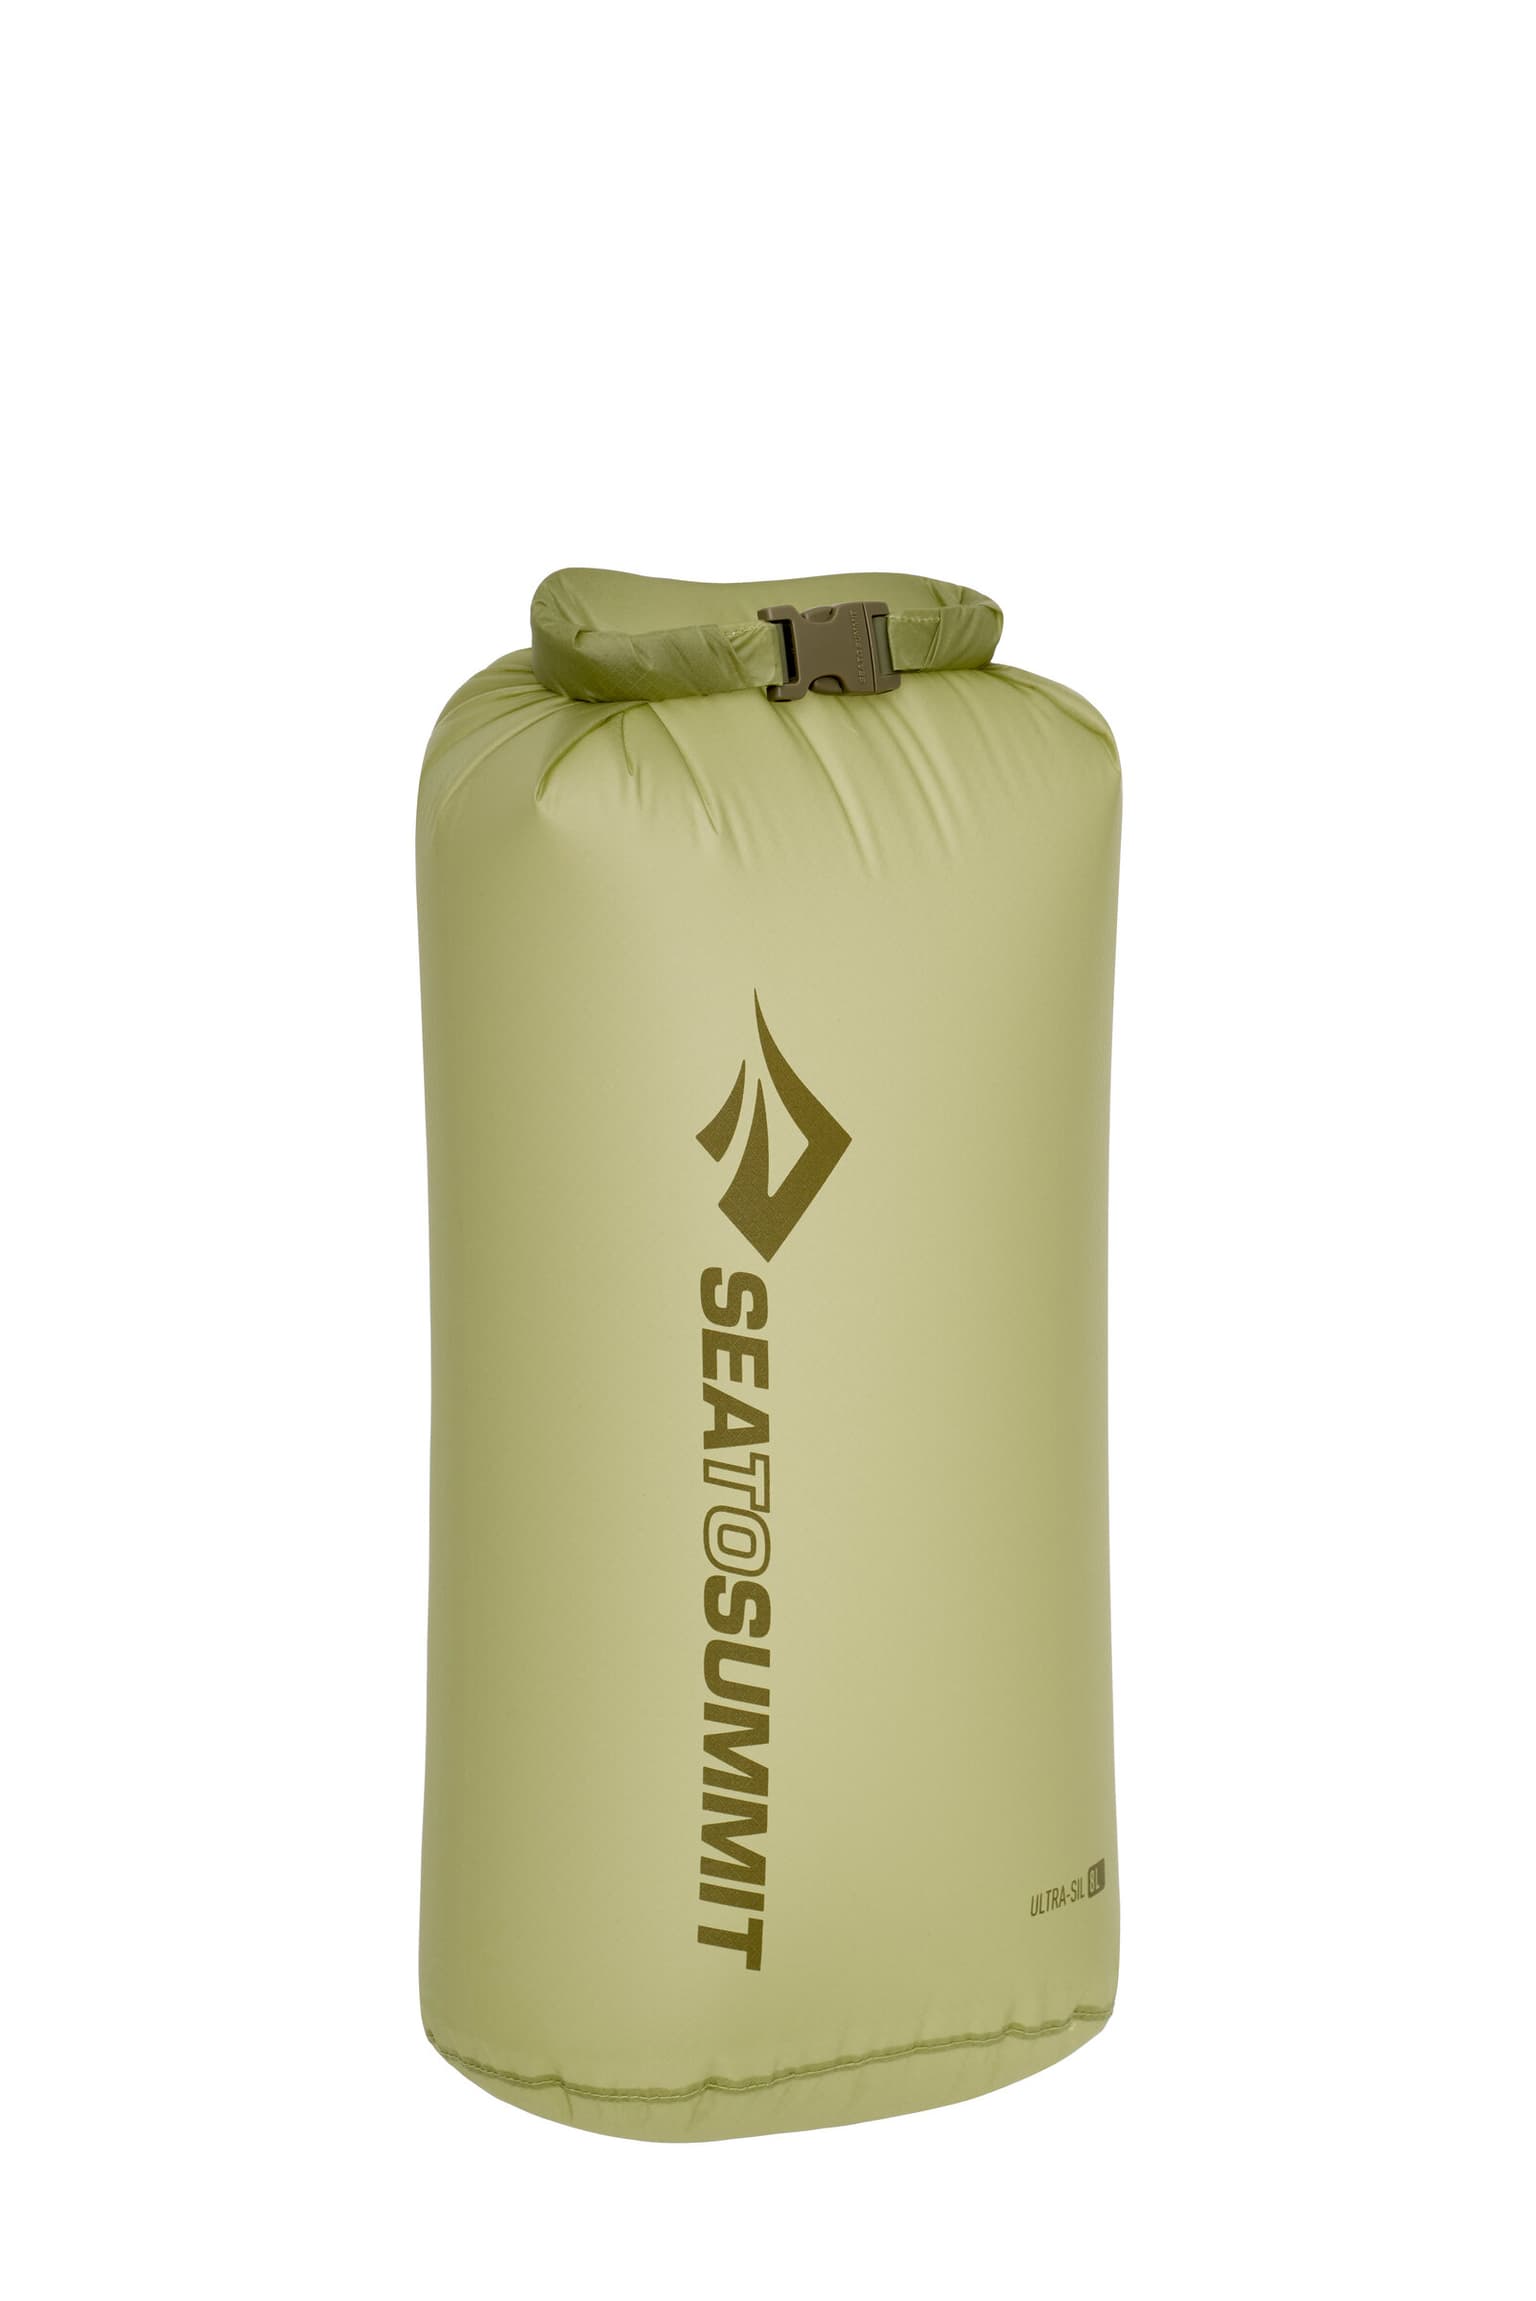 Sea To Summit Sea To Summit Ultra-Sil Dry Bag 13L Dry Bag vert-mousse 1